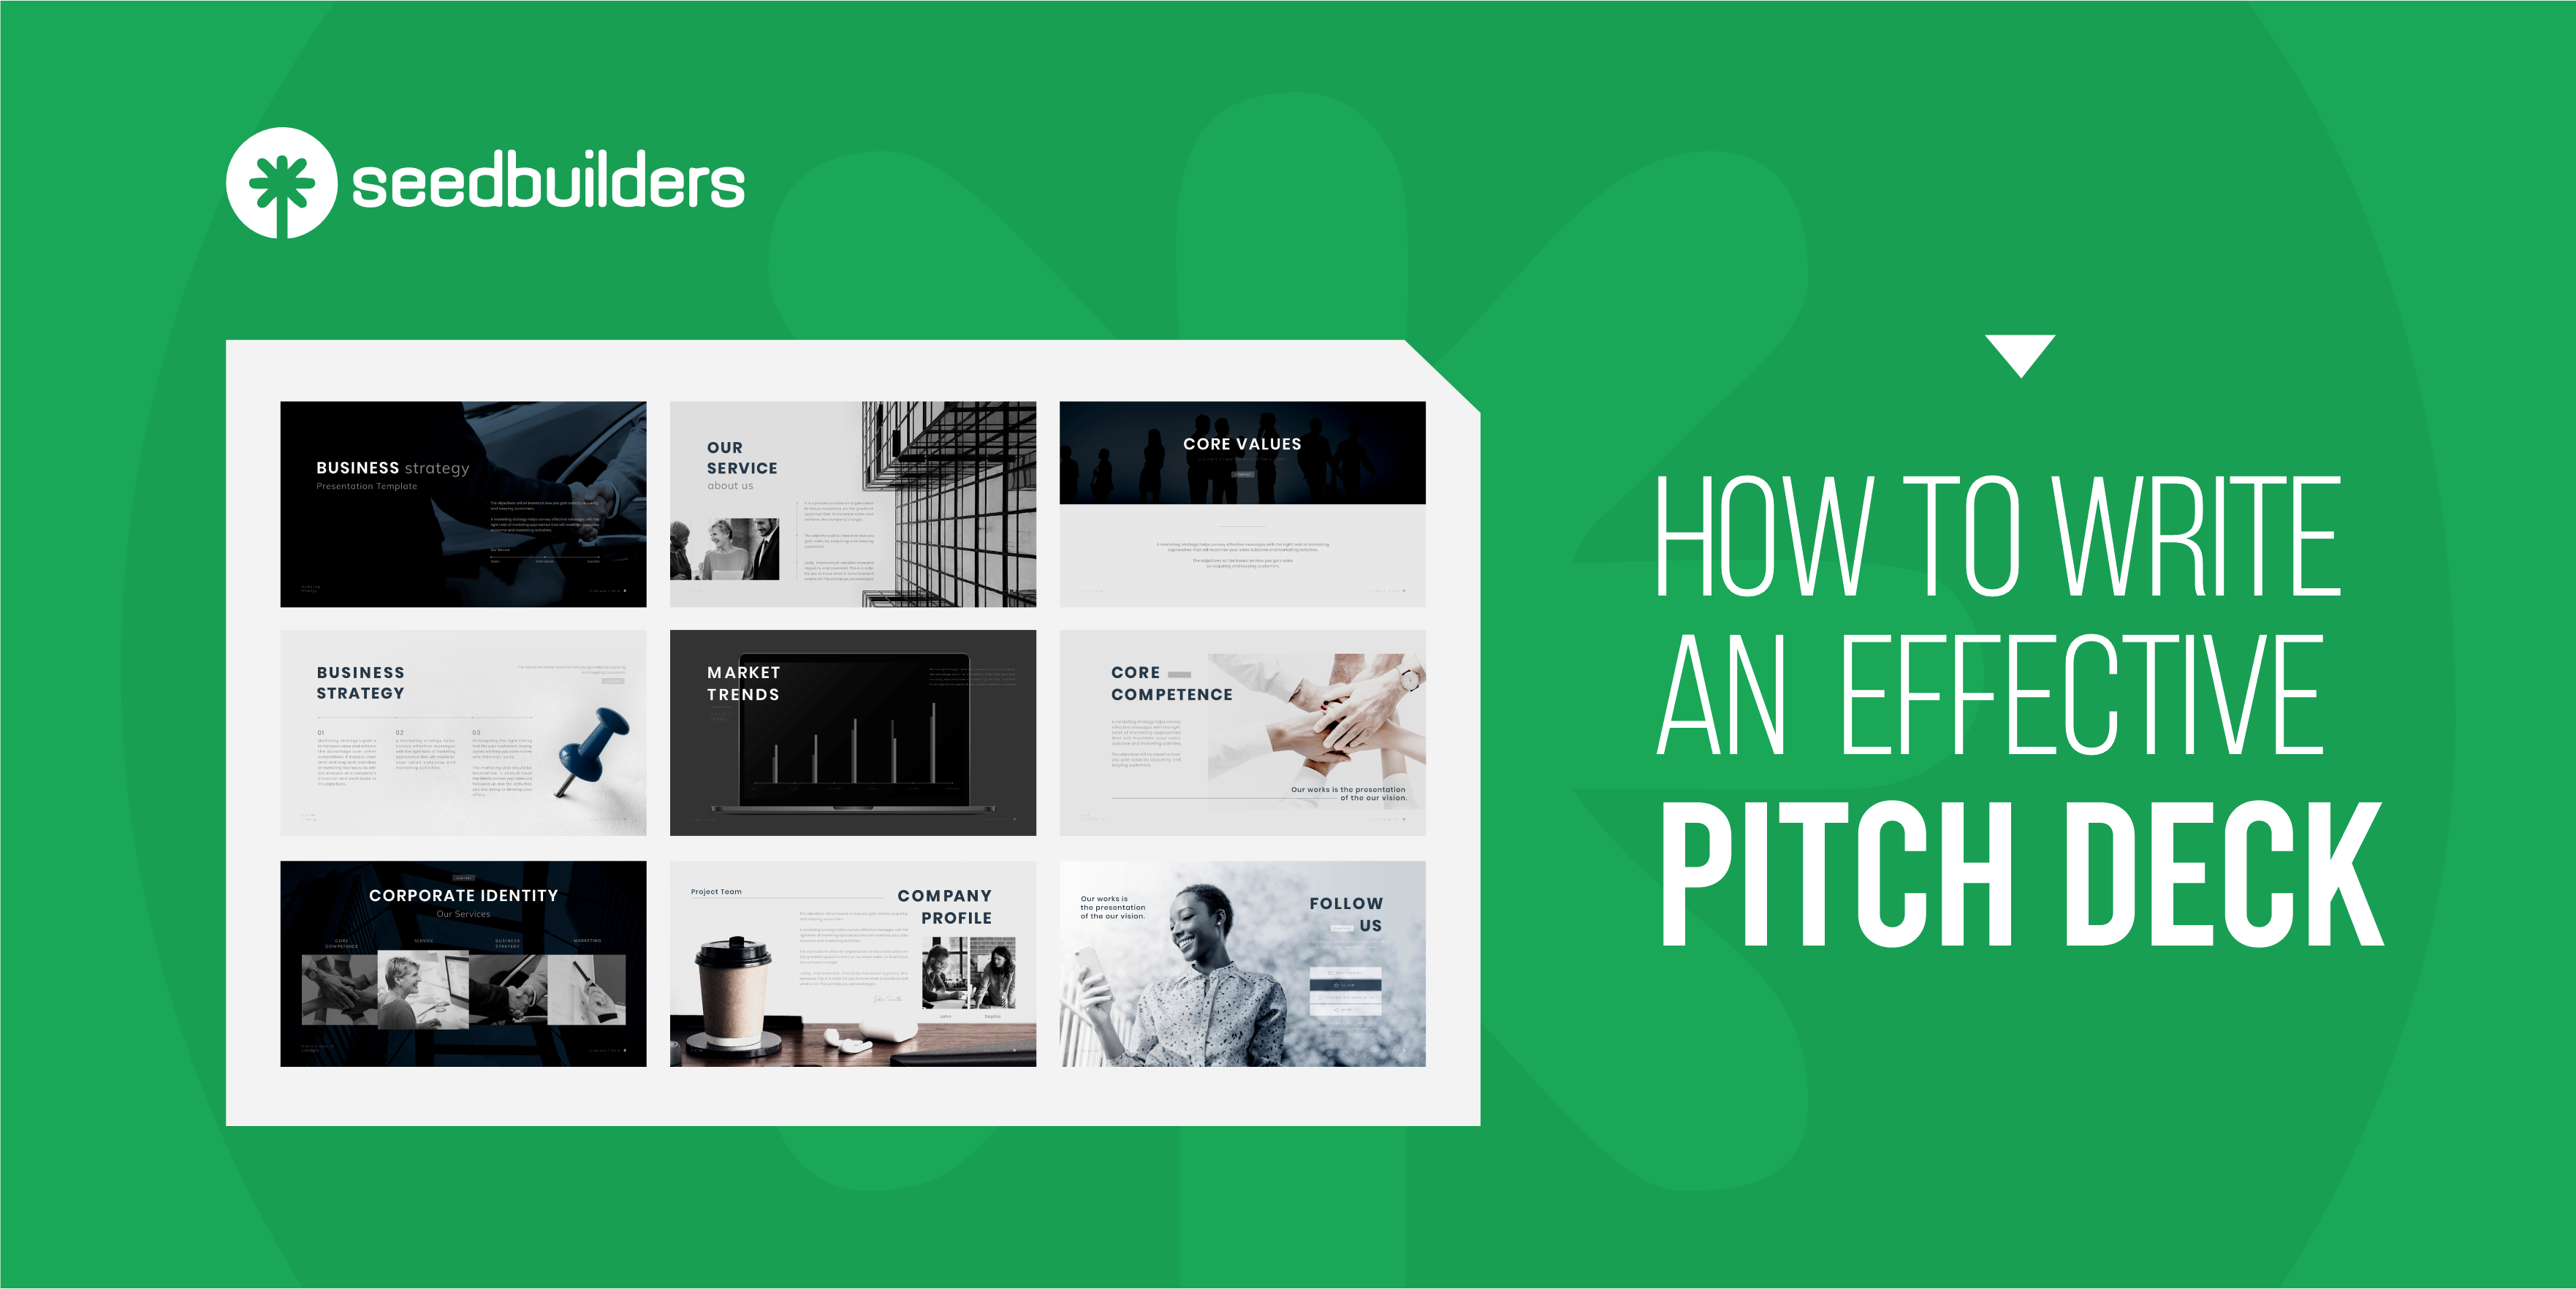 Pitch Deck: Writing an Effective One